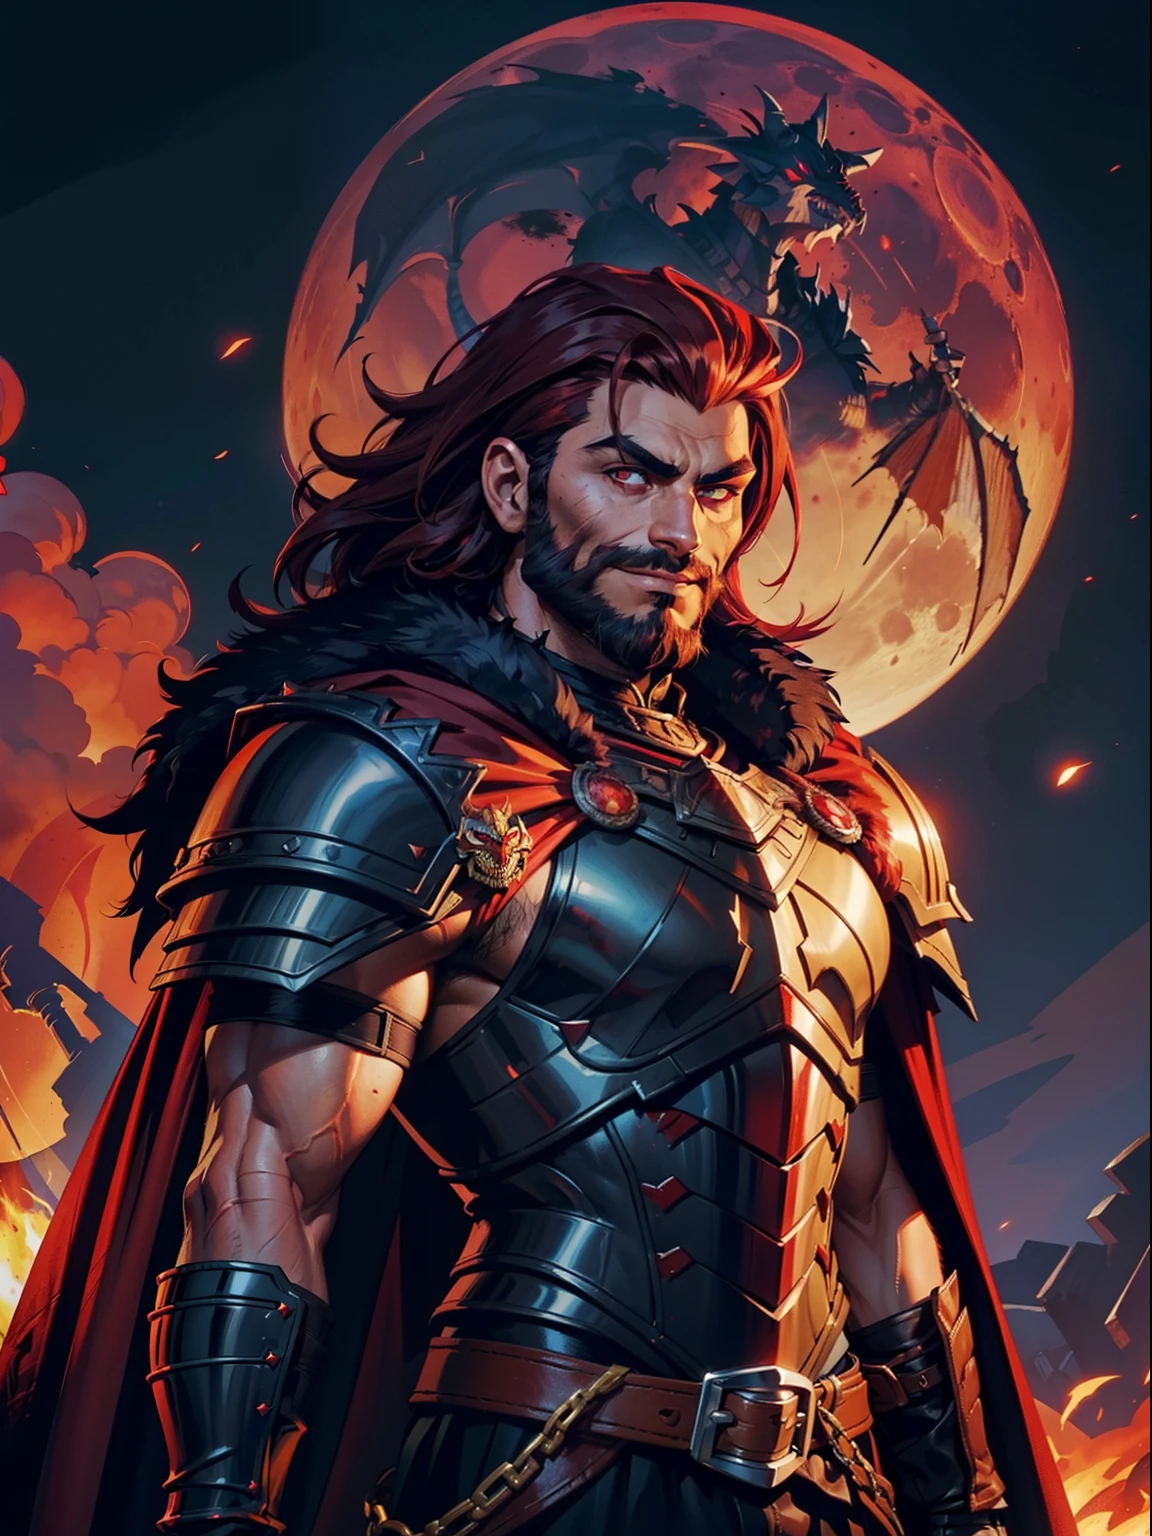 Dark night blood moon background, Darkest dungeon style, game portrait, Sadurang from Marvel, hunk, buffed physics, short mane hair, mullet, defined face, detailed eyes, short beard, glowing red eyes, dark hair, wily smile, badass, dangerous, wearing armor set of red dragon scales, cape of furs